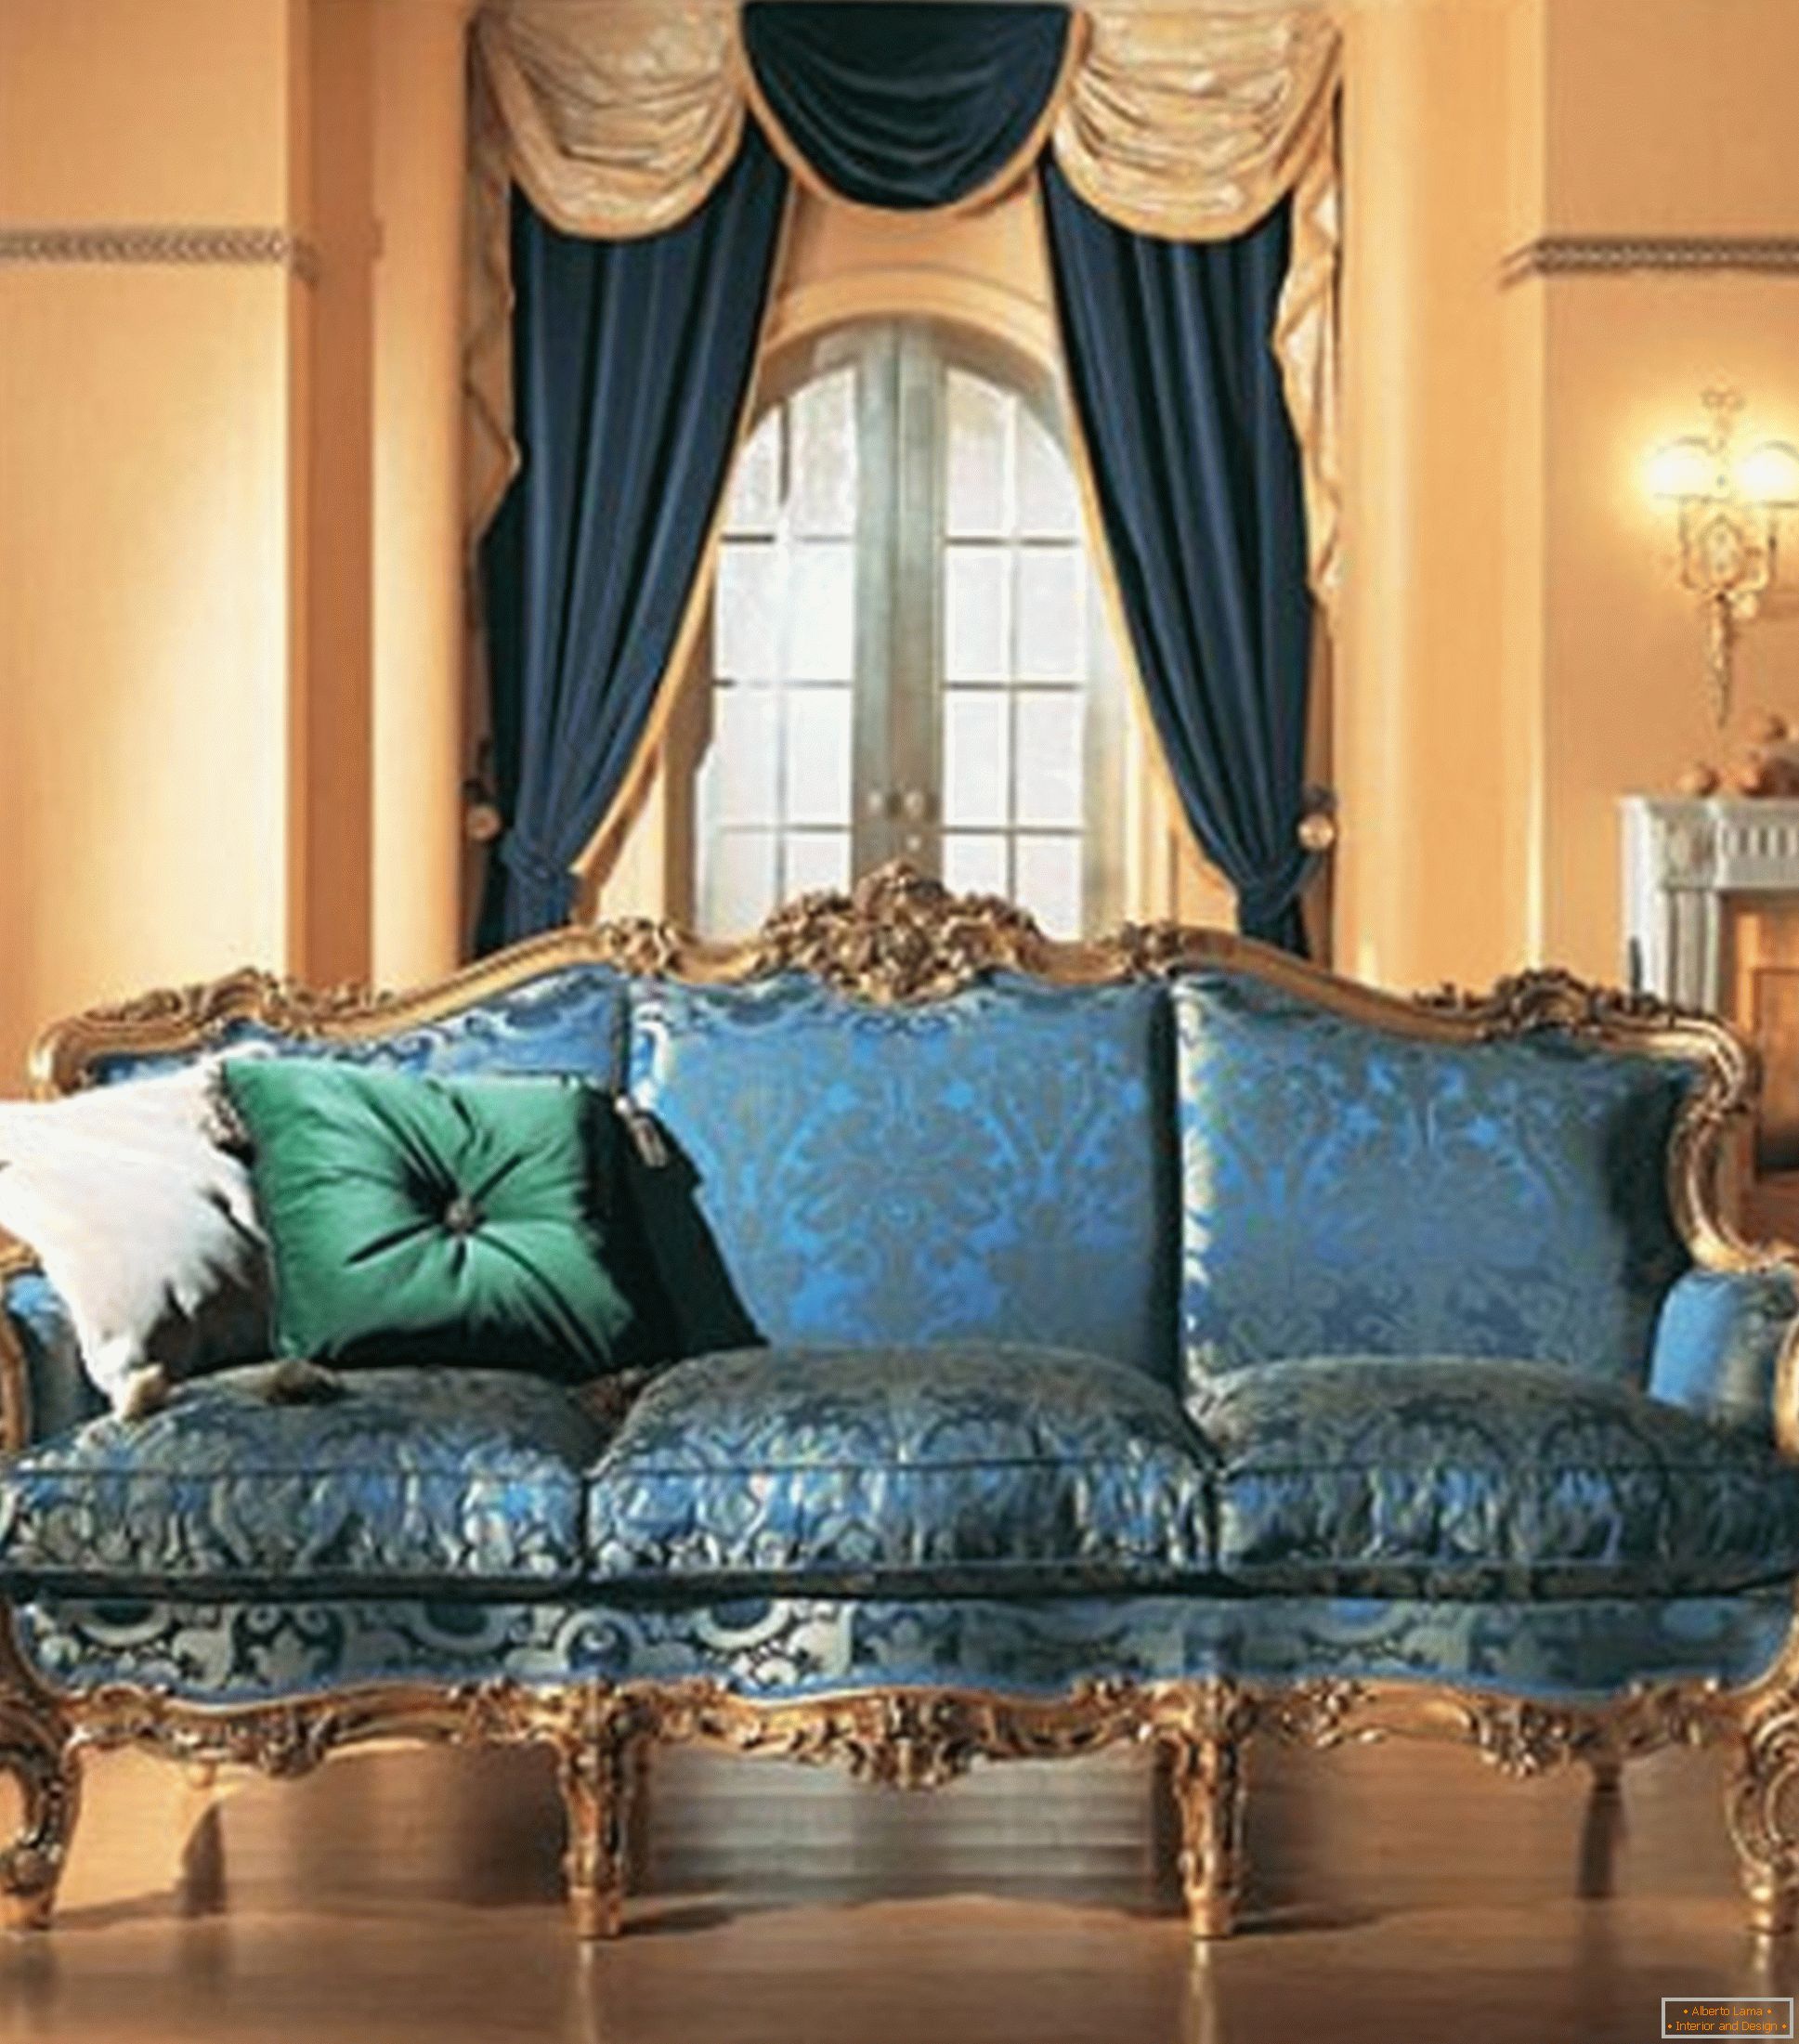 The combination of contrasting colors in the decoration of the living room in the Baroque style.